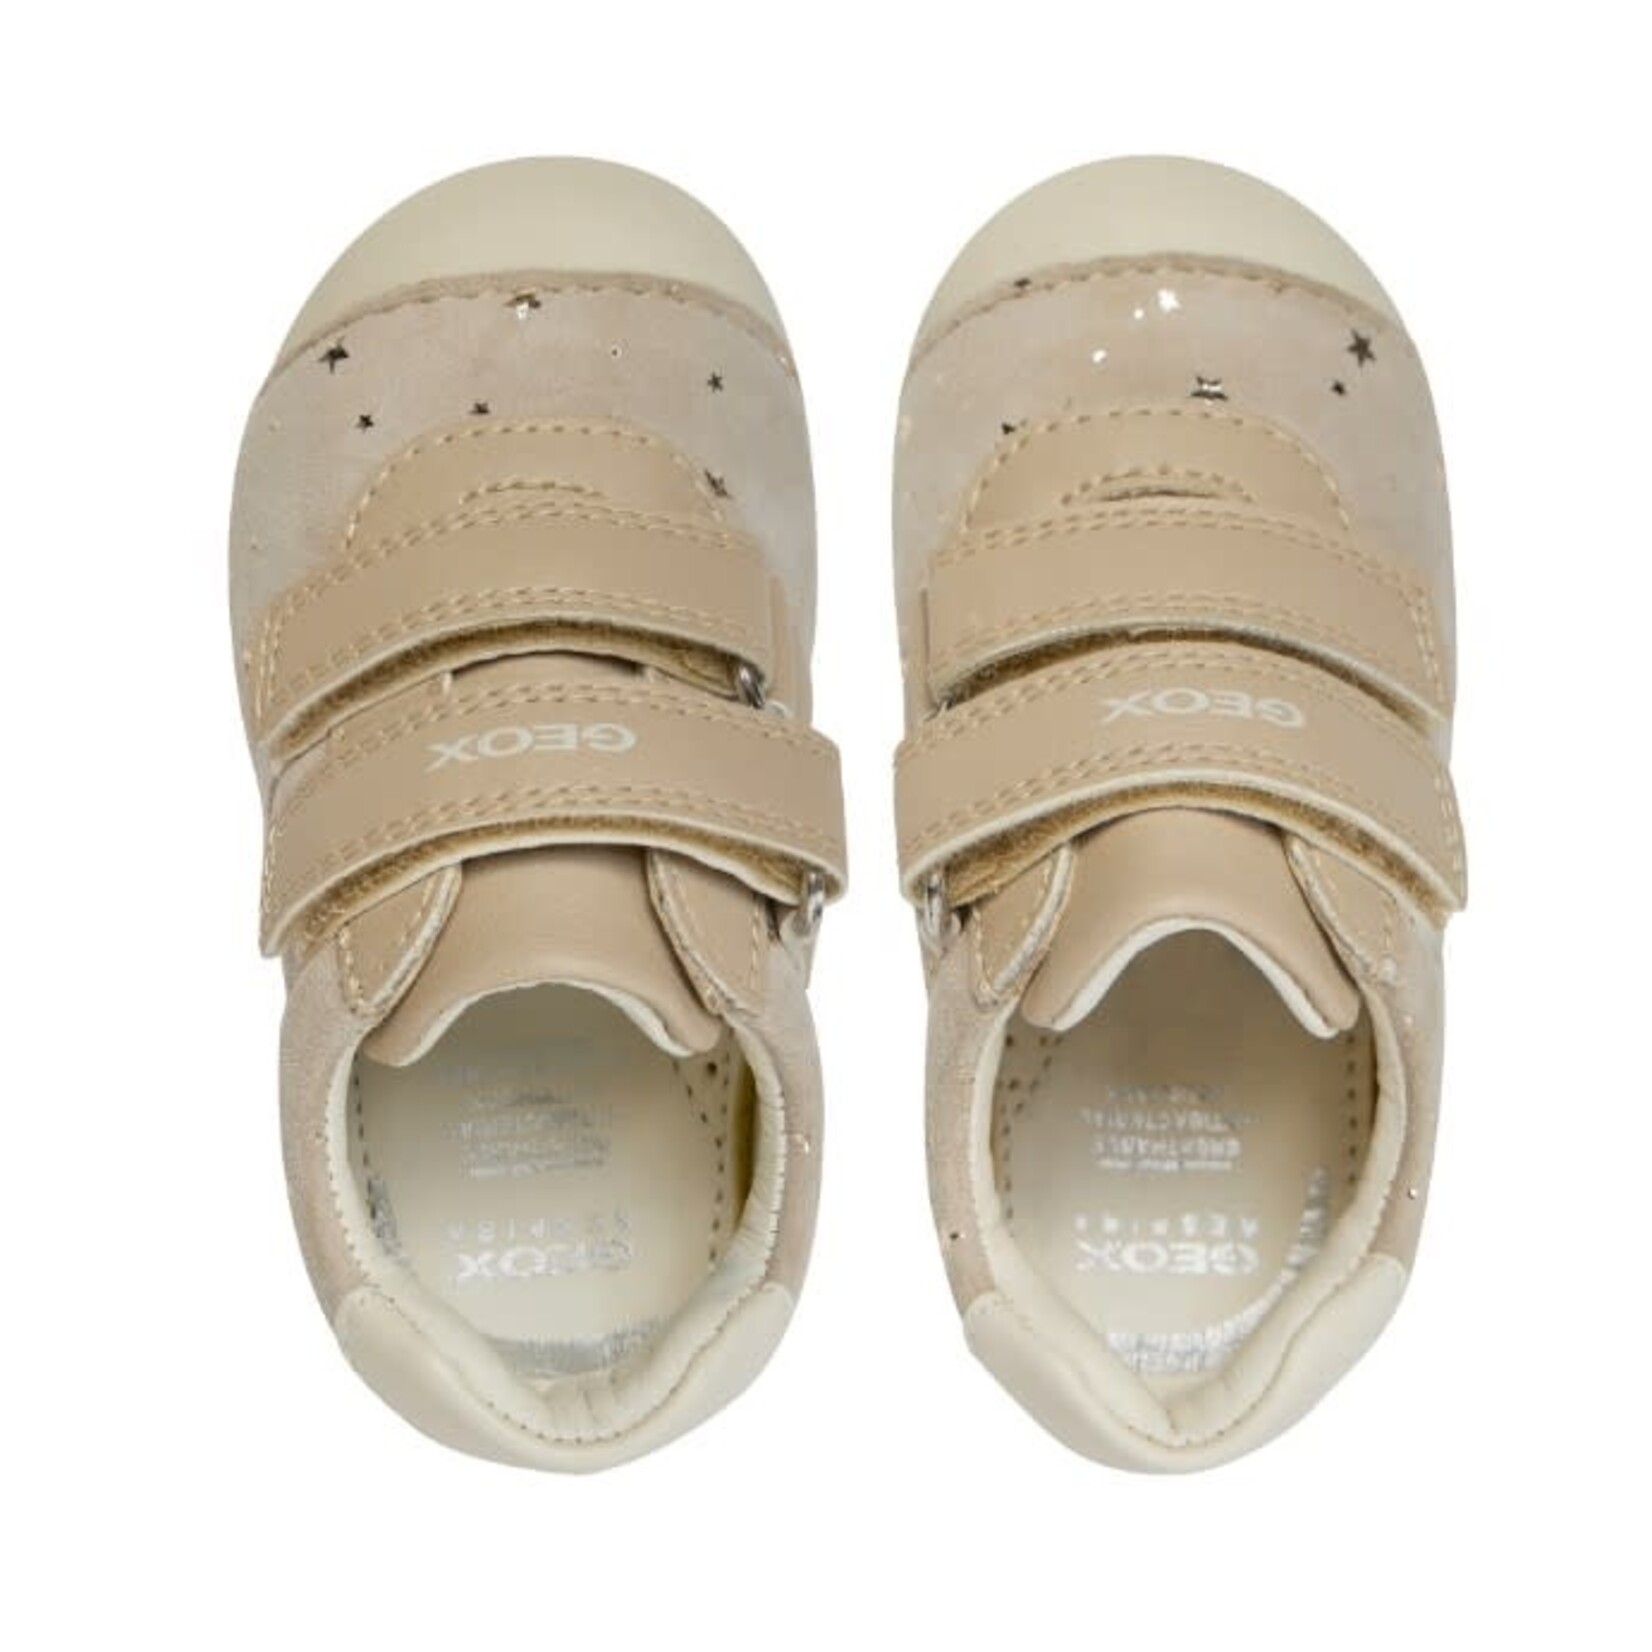 Geox GEOX - First steps soft soled leather shoes 'Tutim - Beige/Platinum'